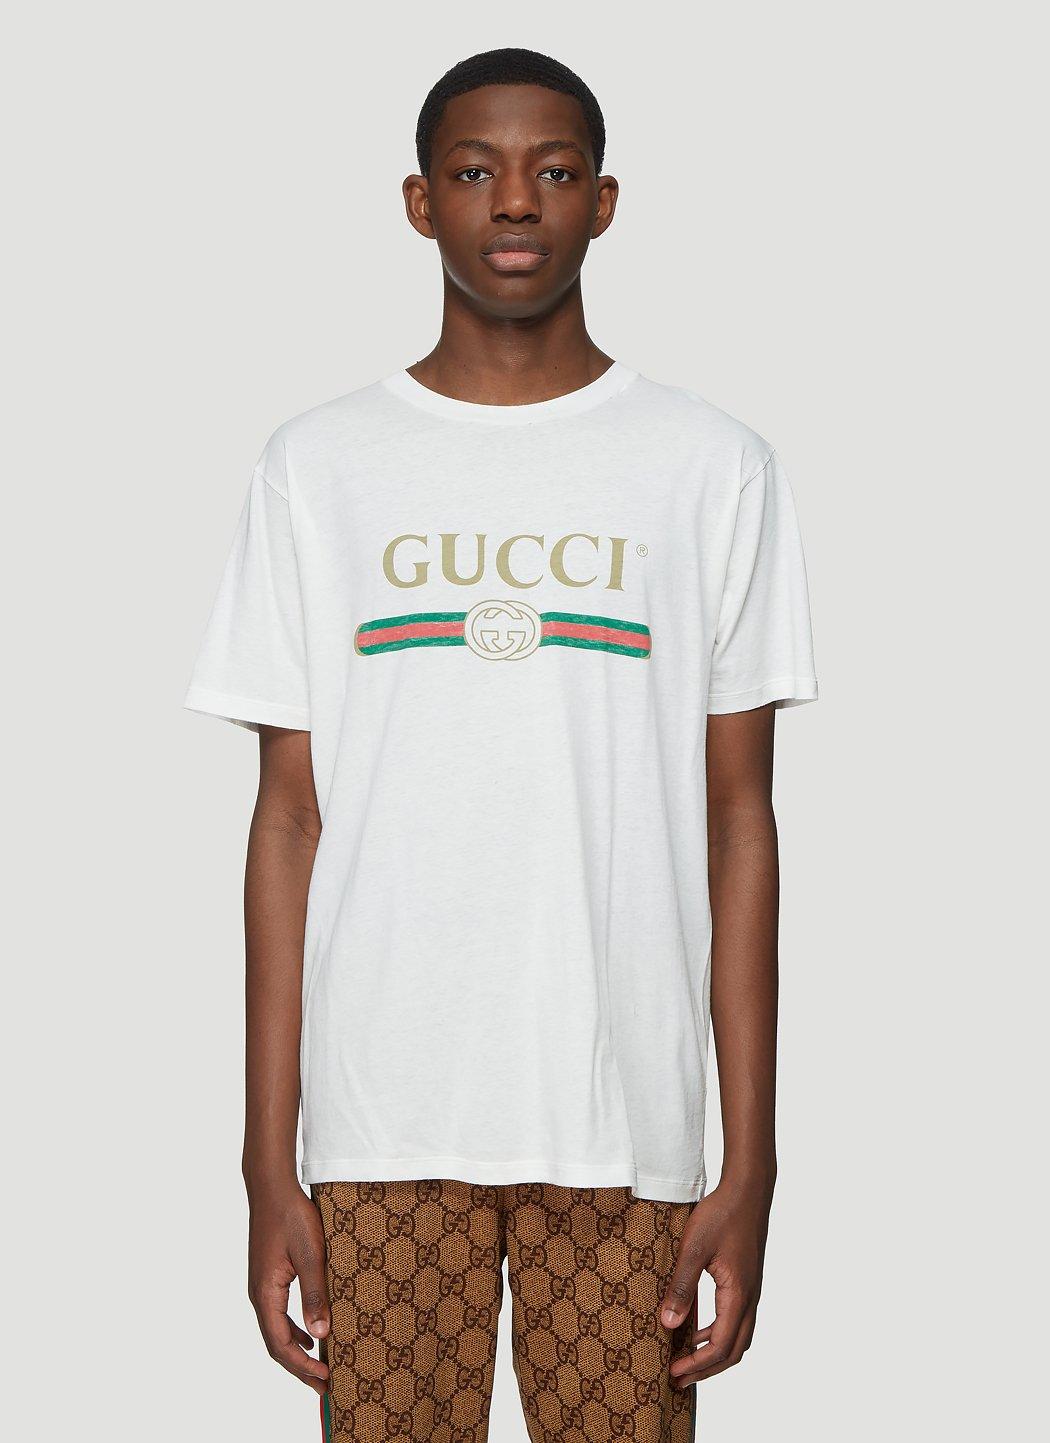 Gucci Cotton Logo T-shirt In White for Men - Lyst